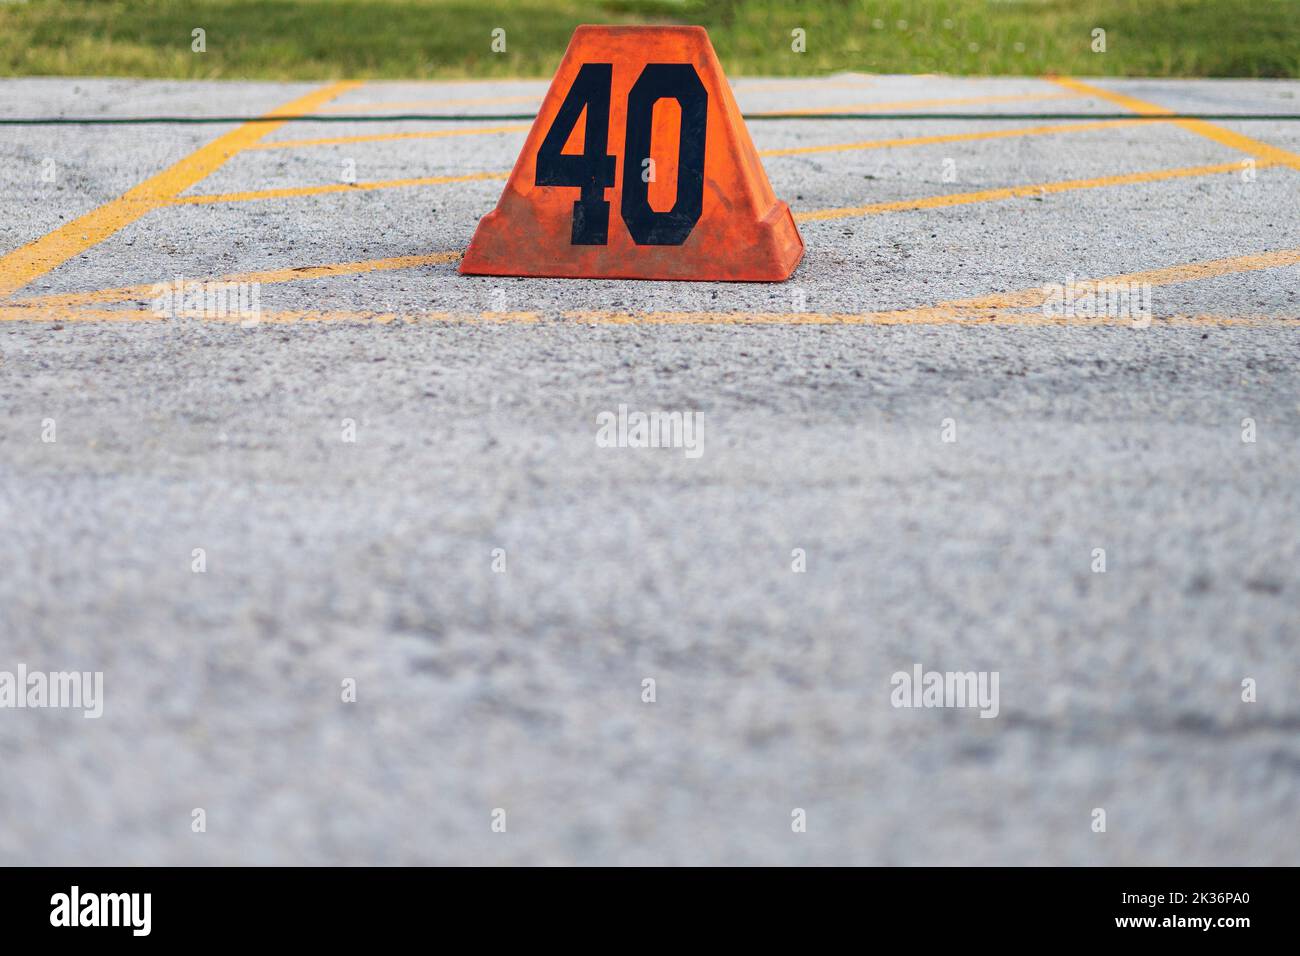 orange forty yard line marker ready for a marching band rehearsal Stock Photo